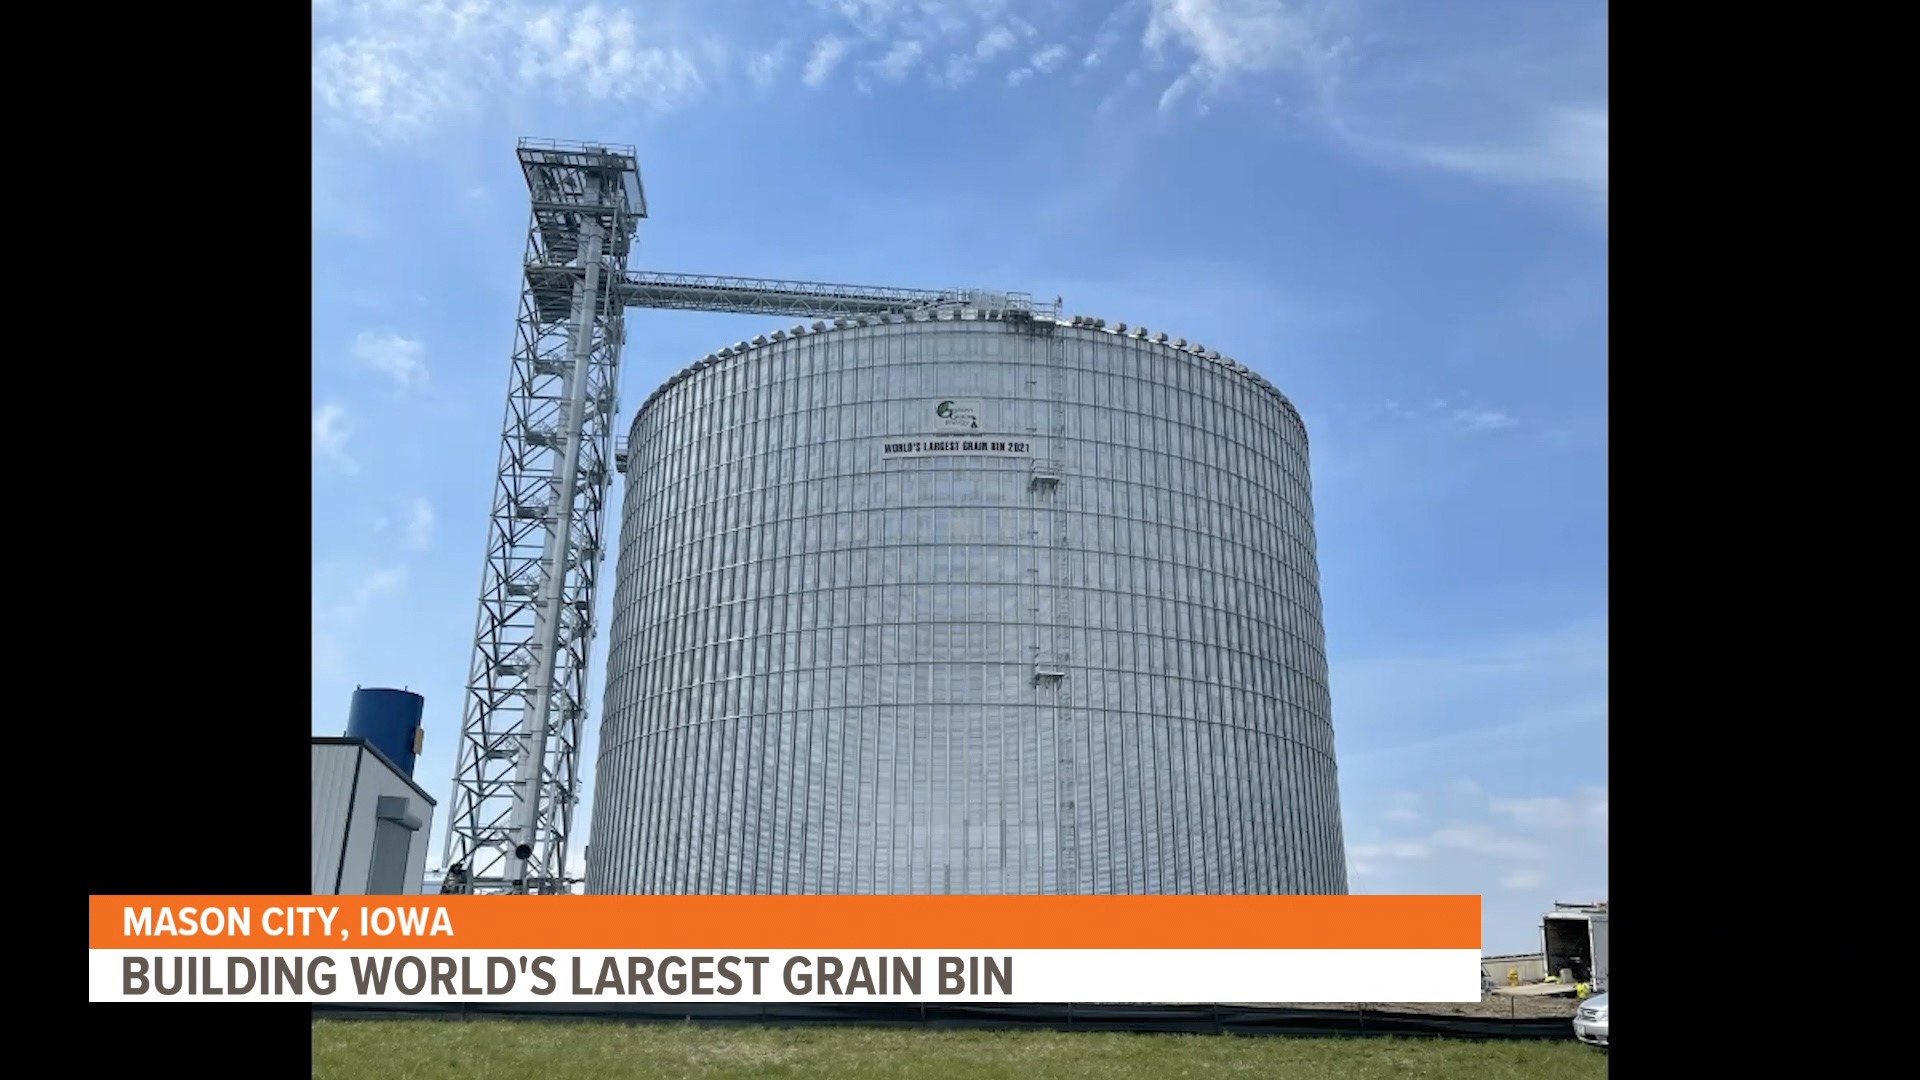 Take a trip to Mason City and you'll see a grain bin large enough to hold 2.2 million bushels or a 767 Boeing Jet.